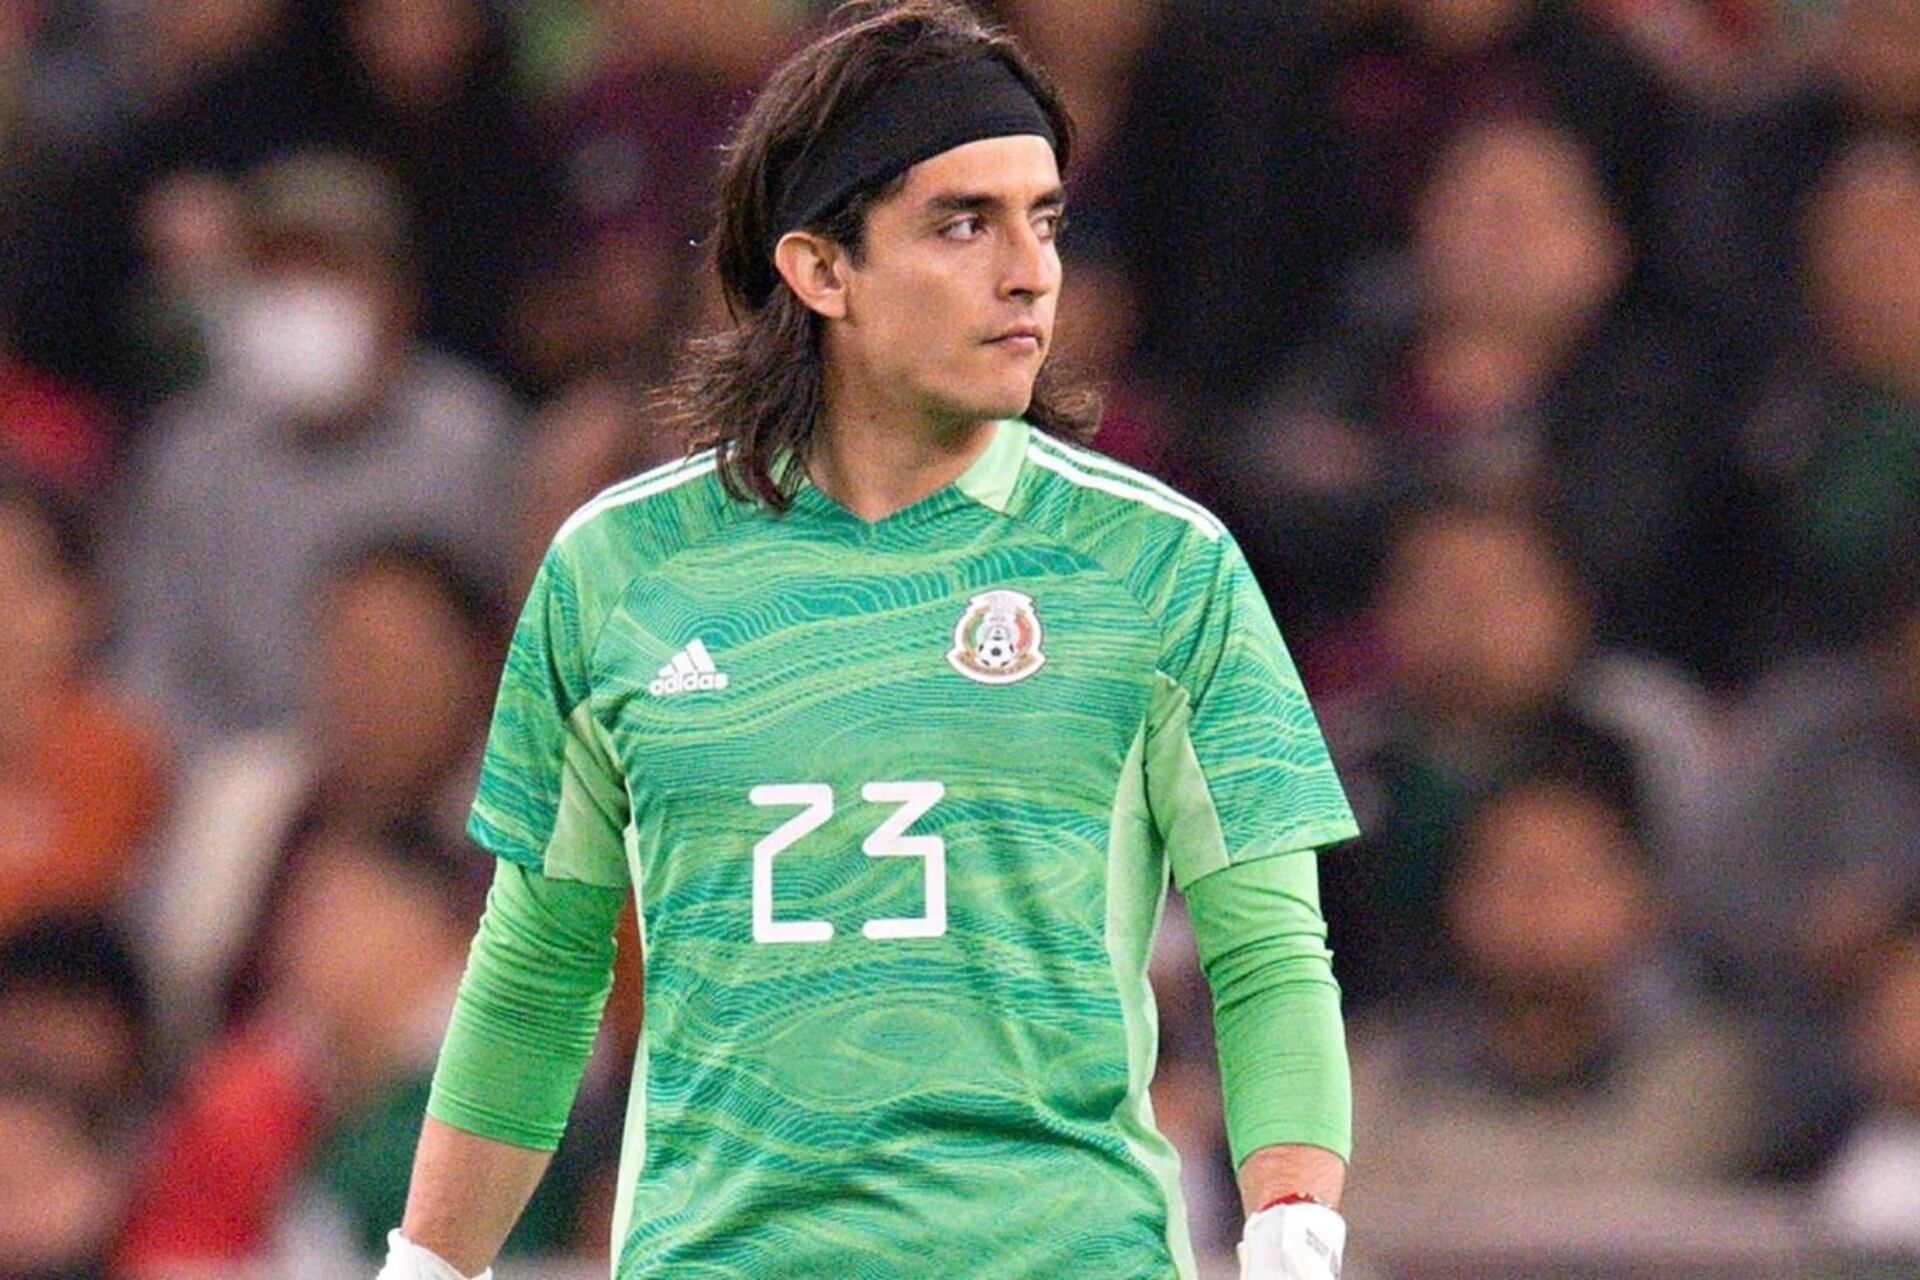 This goalkeeper will retire from Mexico National Team to leave his place to Carlos Acevedo